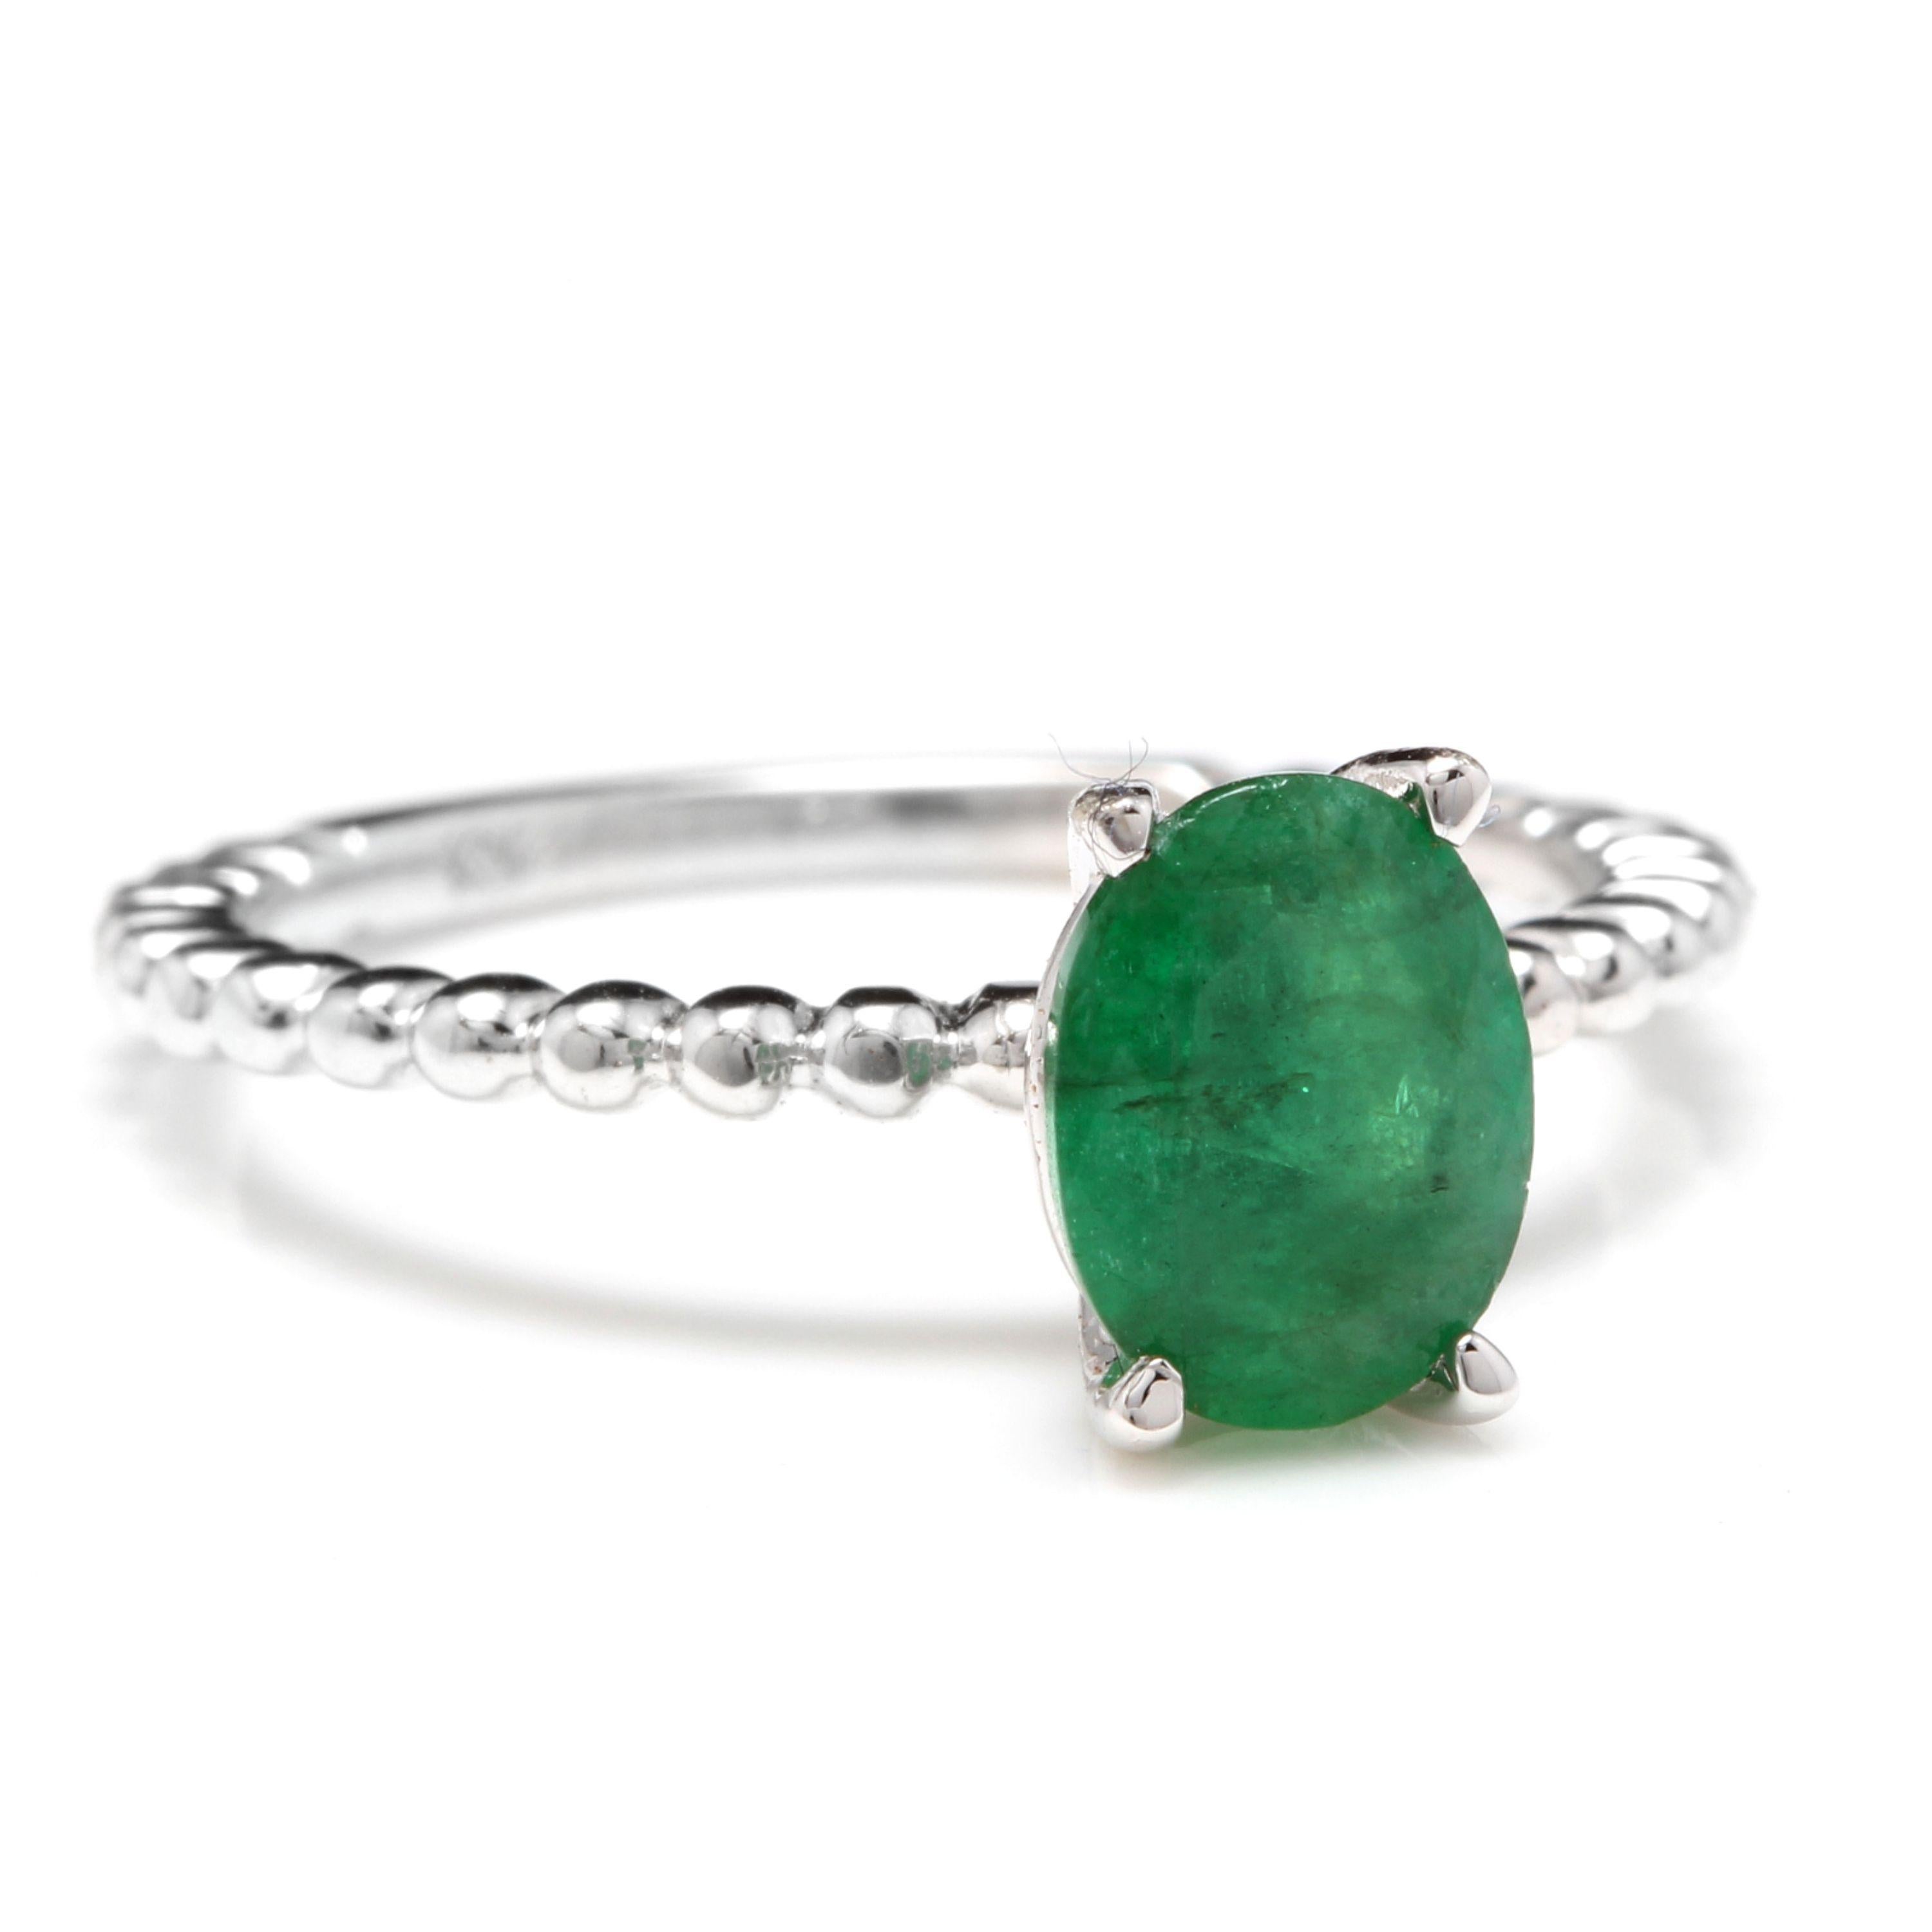 1.20 Carats Exquisite Natural Emerald 14K Solid White Gold Ring

Total Natural Emerald Weight is: Approx. 1.20 Carats

Emerald Measures: Approx. 8.00 x 6.00mm

Emerald Treatment: Oil

Ring size: 7 (we offer free re-sizing upon request)

Ring total